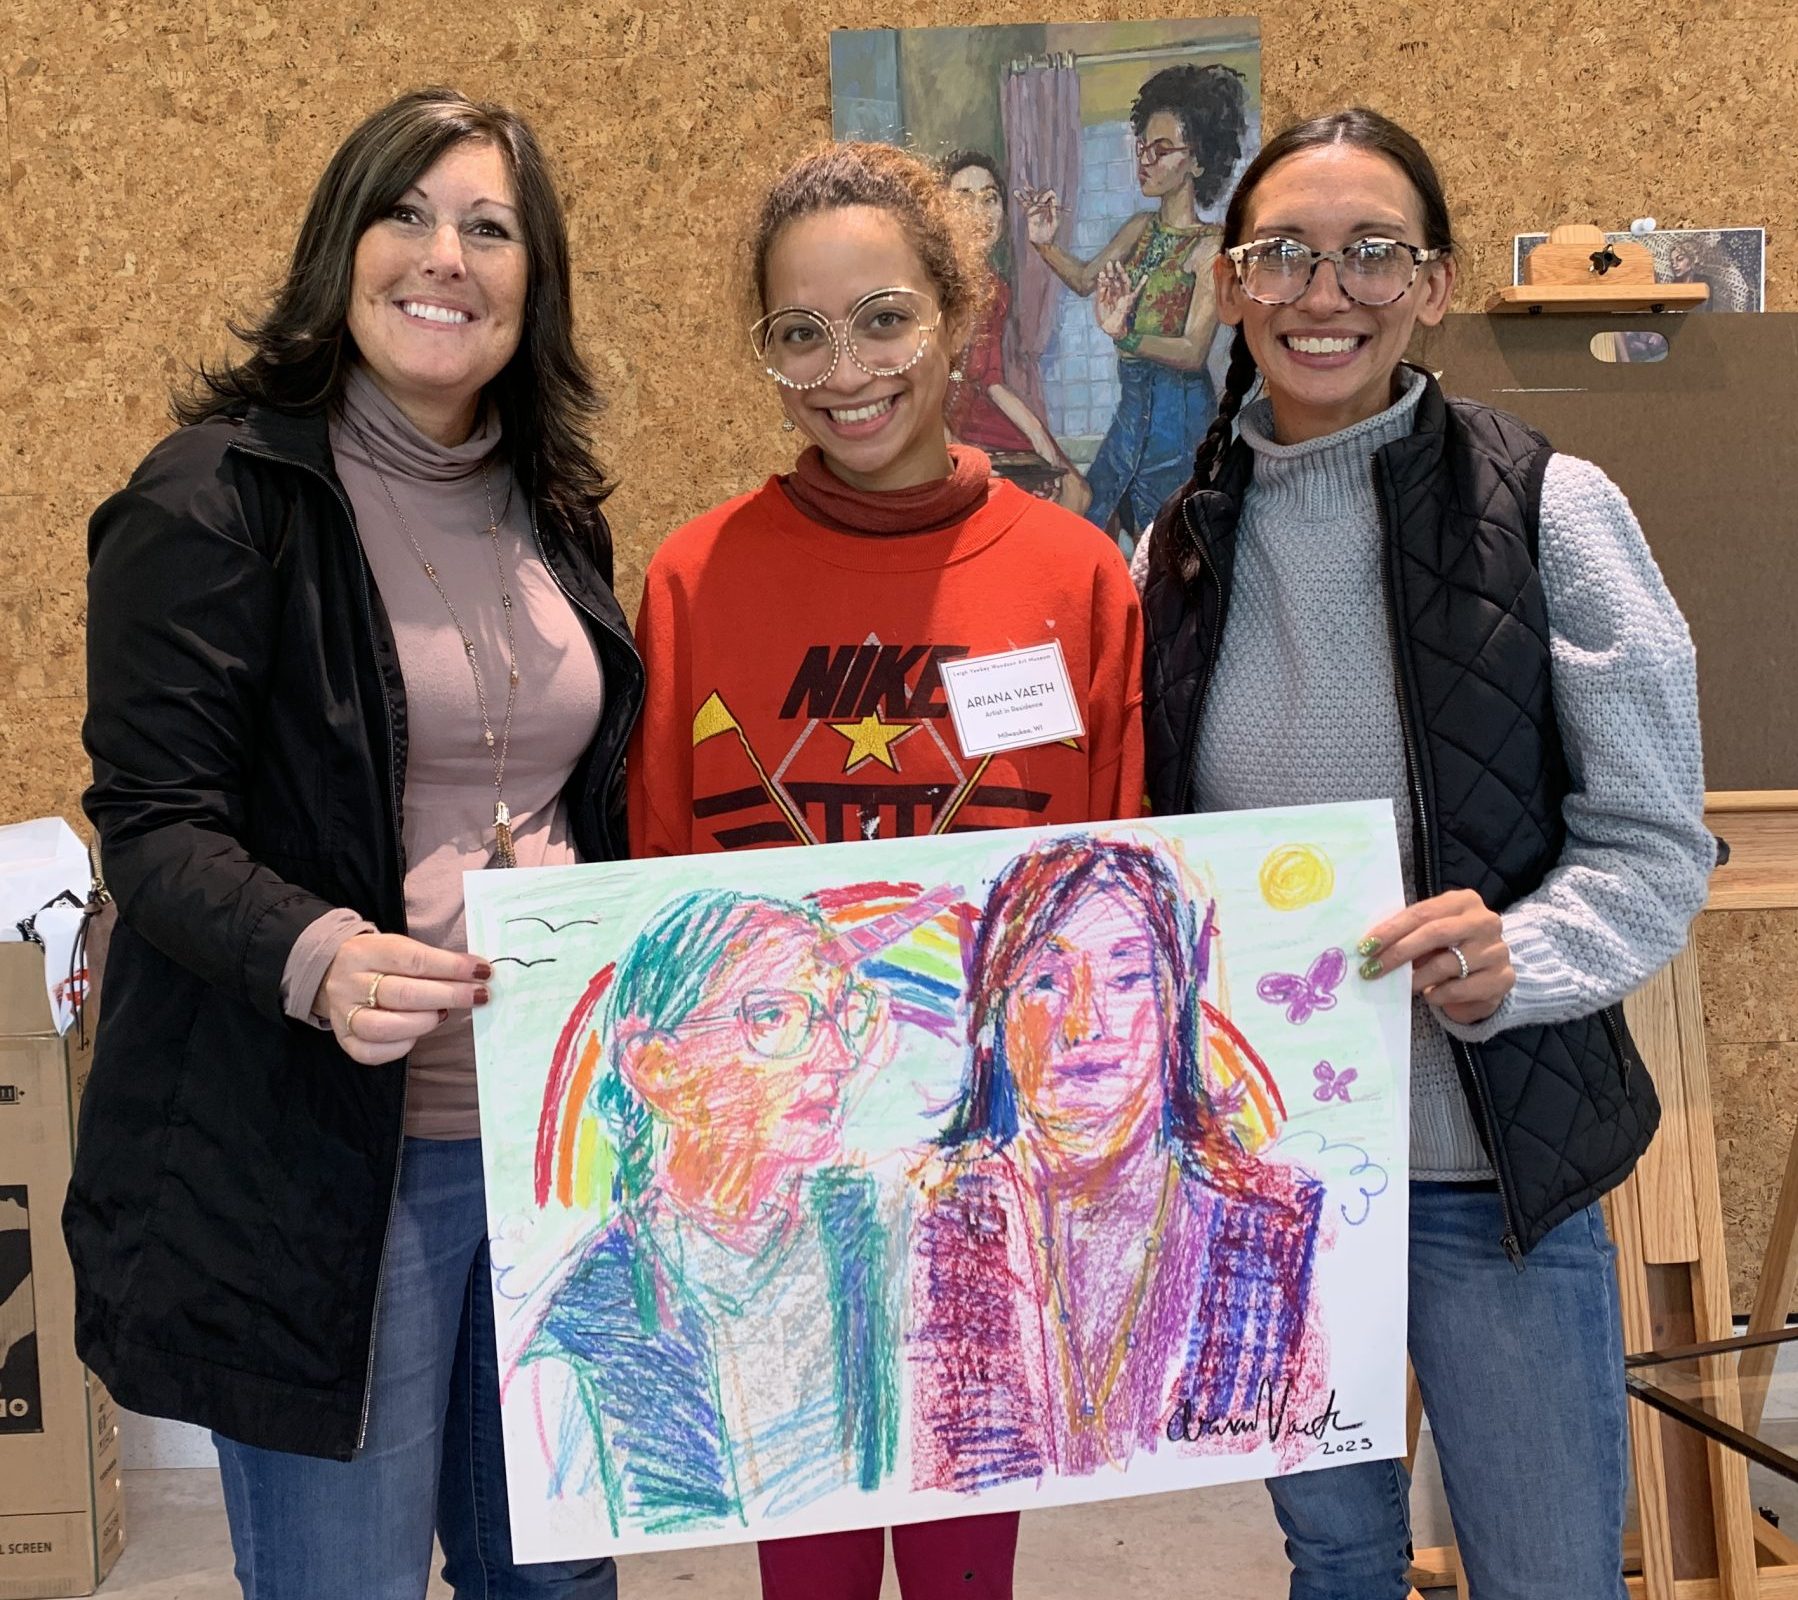 Three women stand together holding a colorful drawing created by Ariana Vaeth. The drawing was created in oil pastel with lots of purples, pinks, and blues. All three people are smiling happily. 